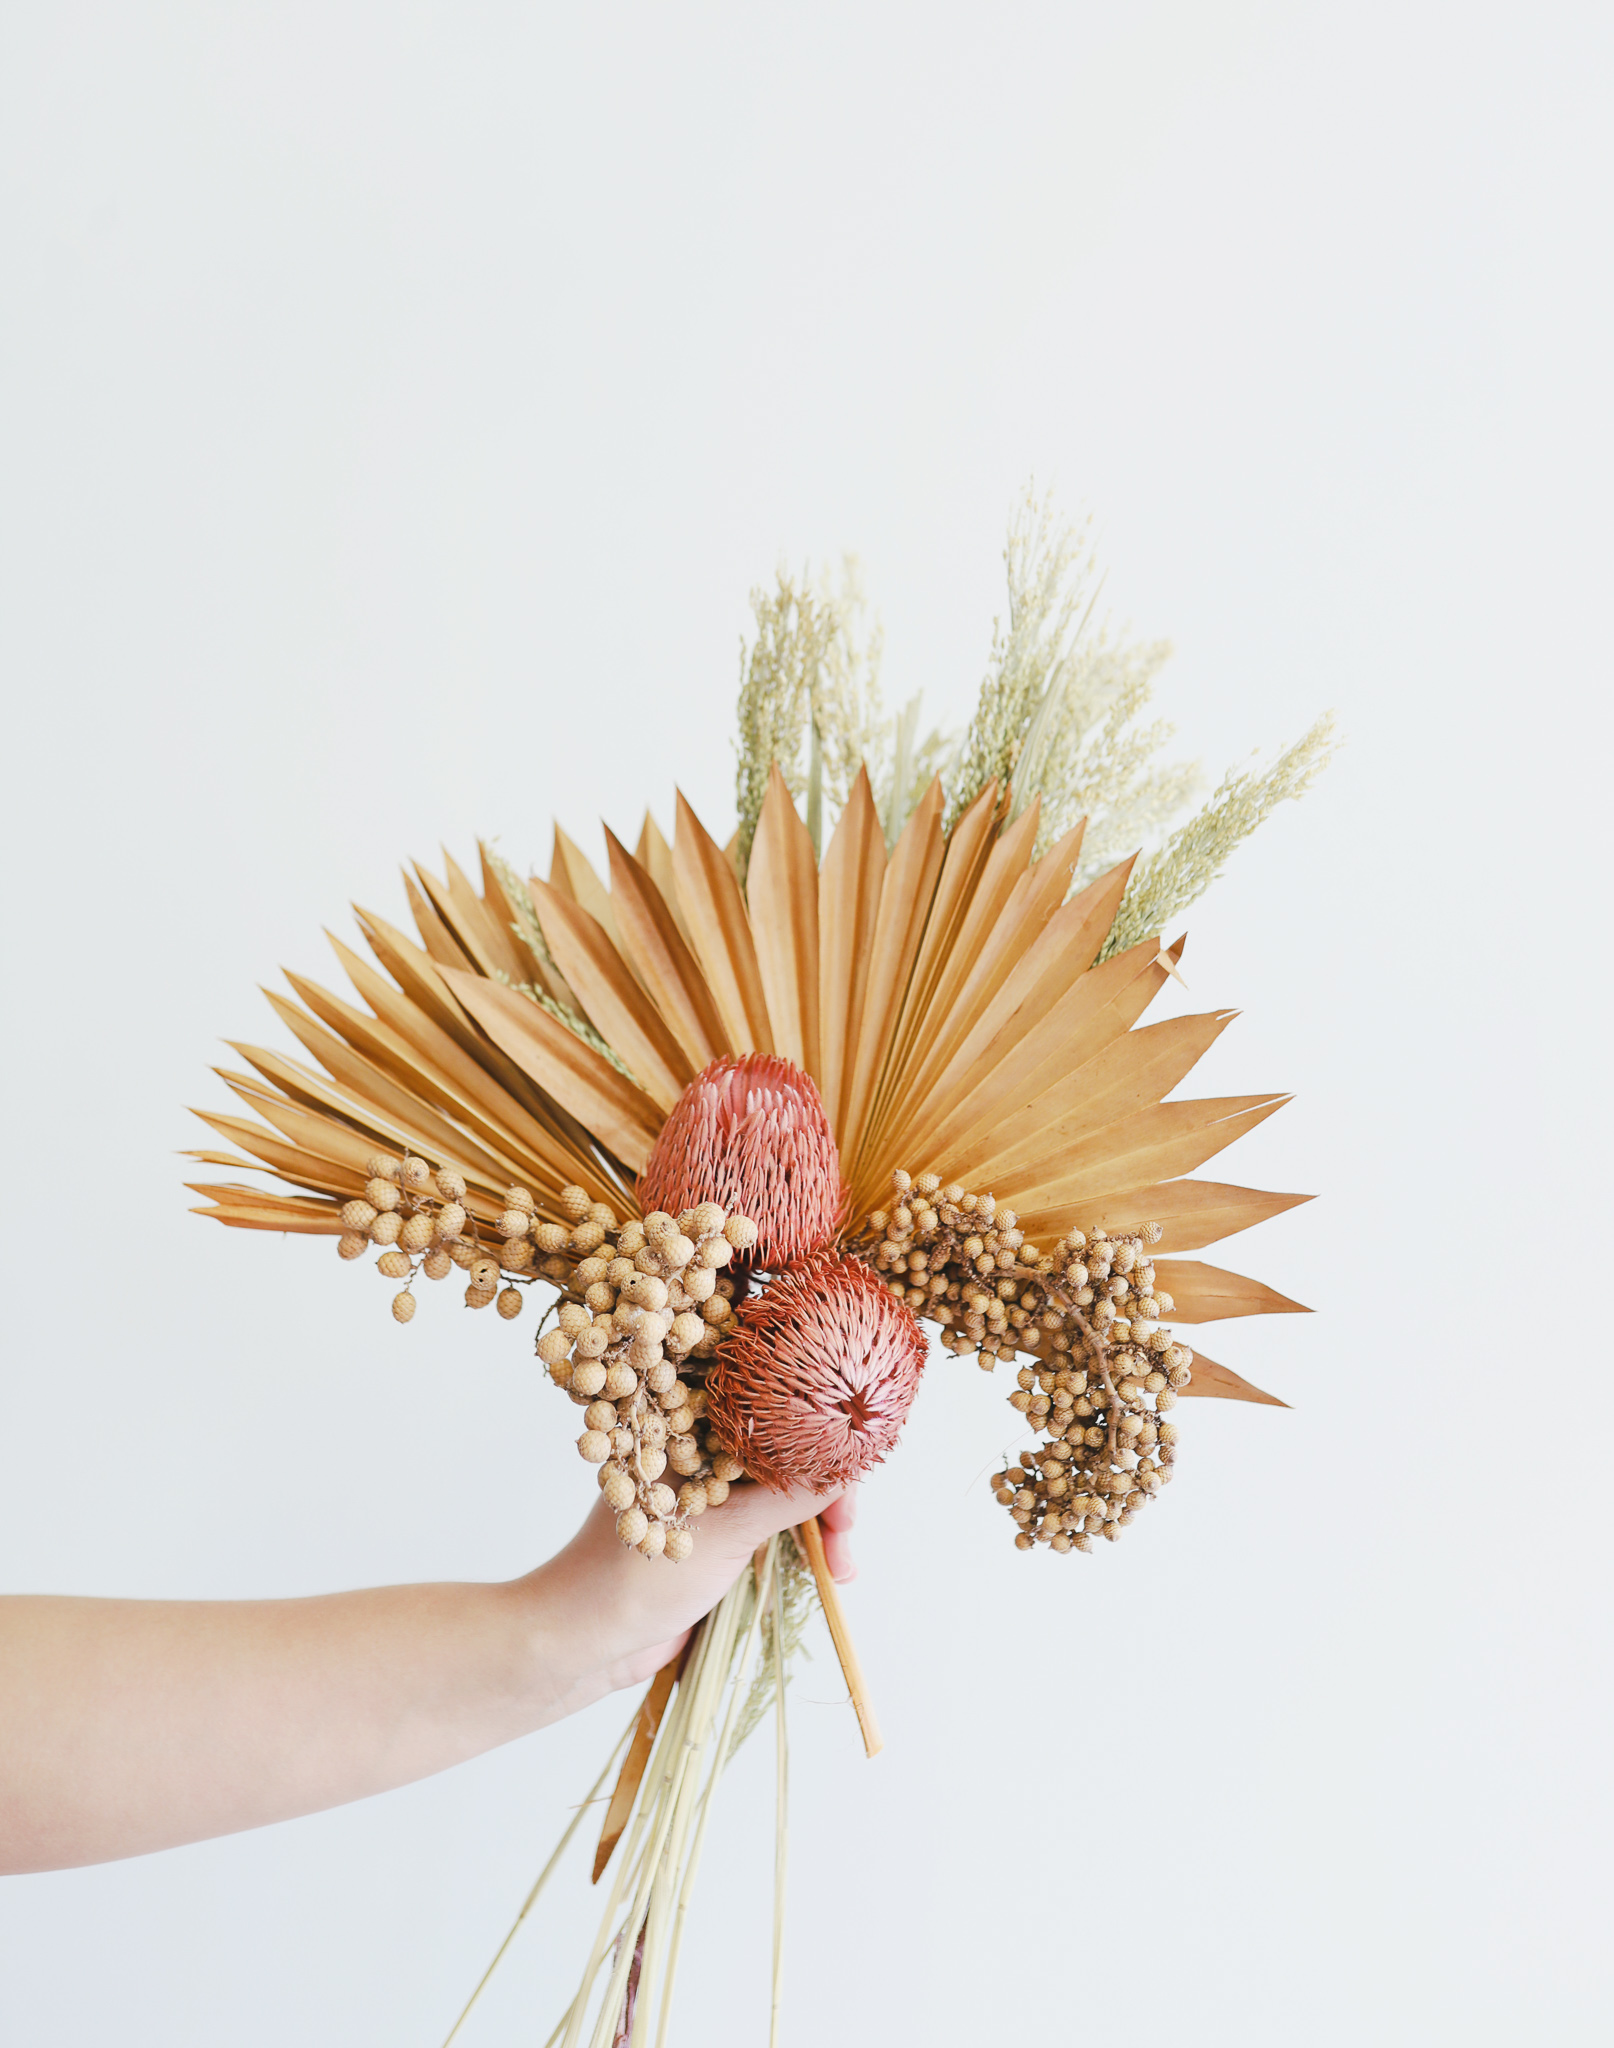 Dried Flower Bundle with Preserved Palms and Preserved Berries